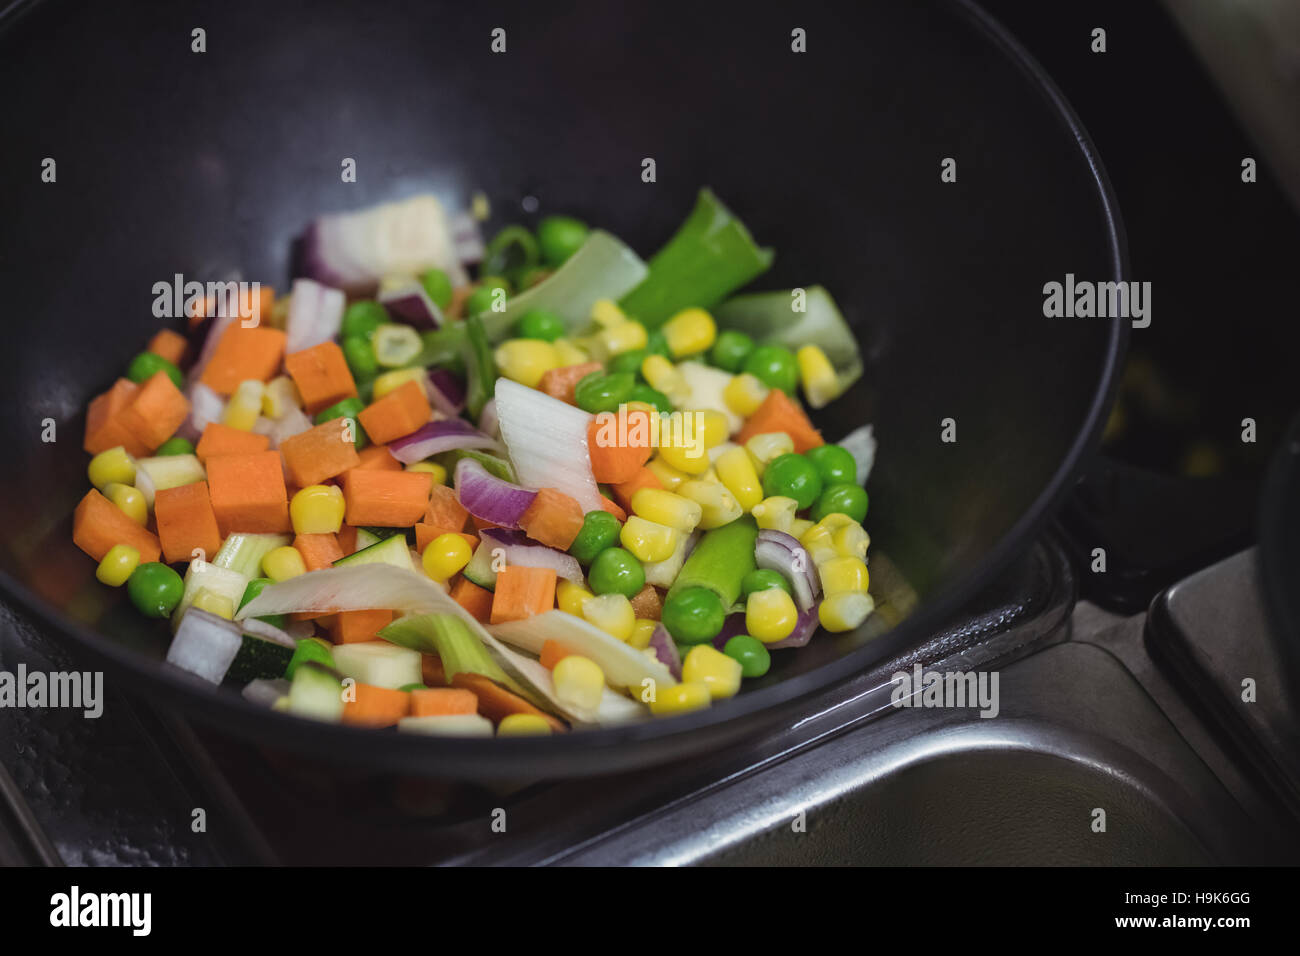 Chopped vegetables in pot Stock Photo